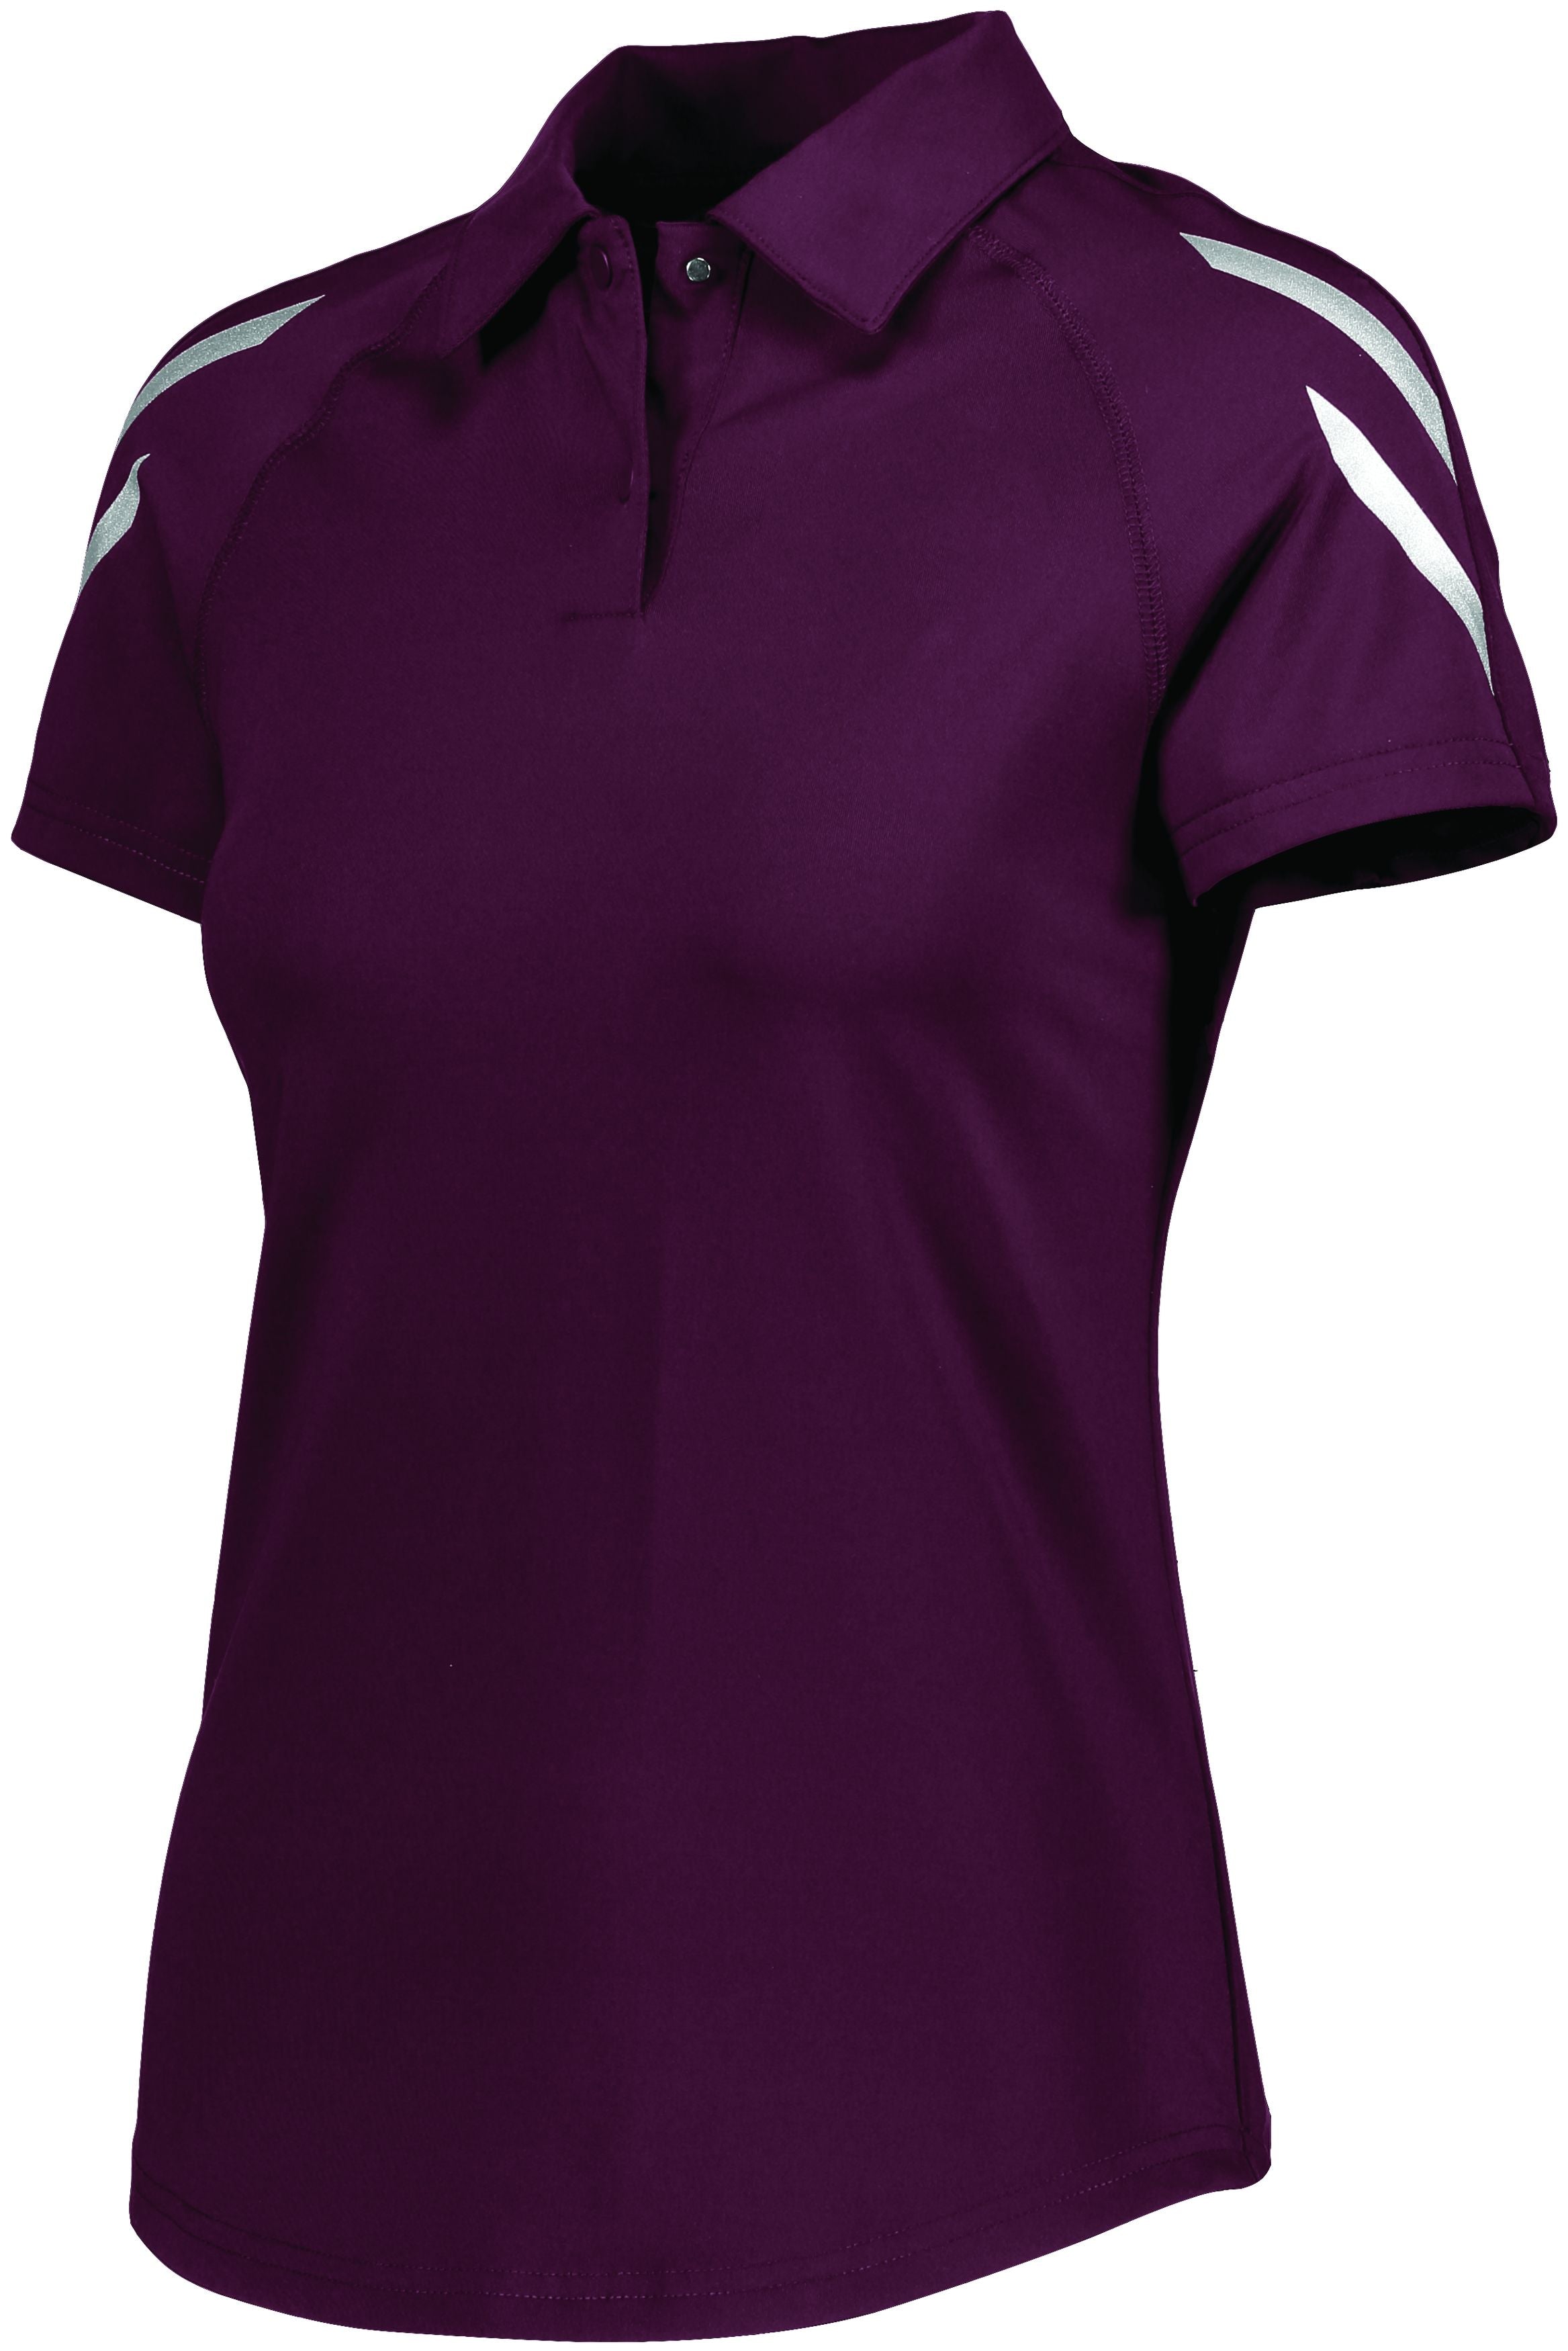 Holloway Ladies Flux Polo in Maroon  -Part of the Ladies, Ladies-Polo, Polos, Holloway, Shirts, Flux-Collection, Corporate-Collection product lines at KanaleyCreations.com